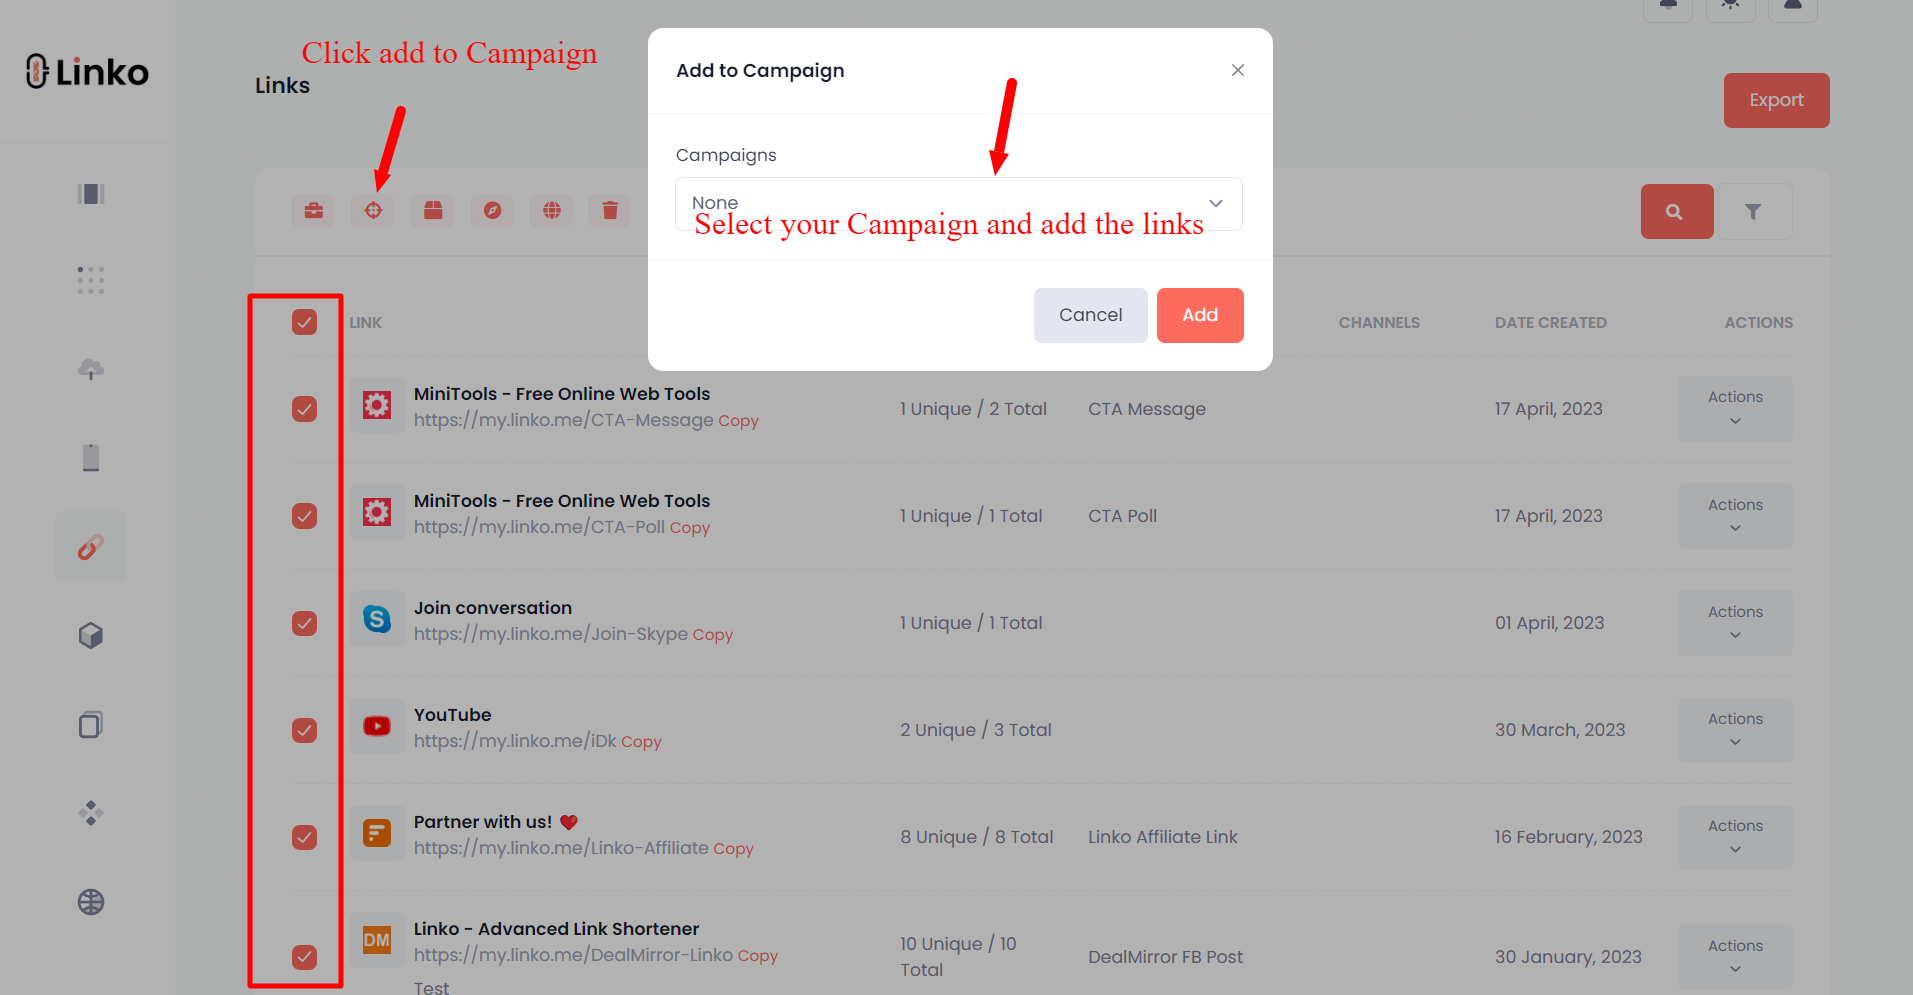 Add links to Campaign - Linko